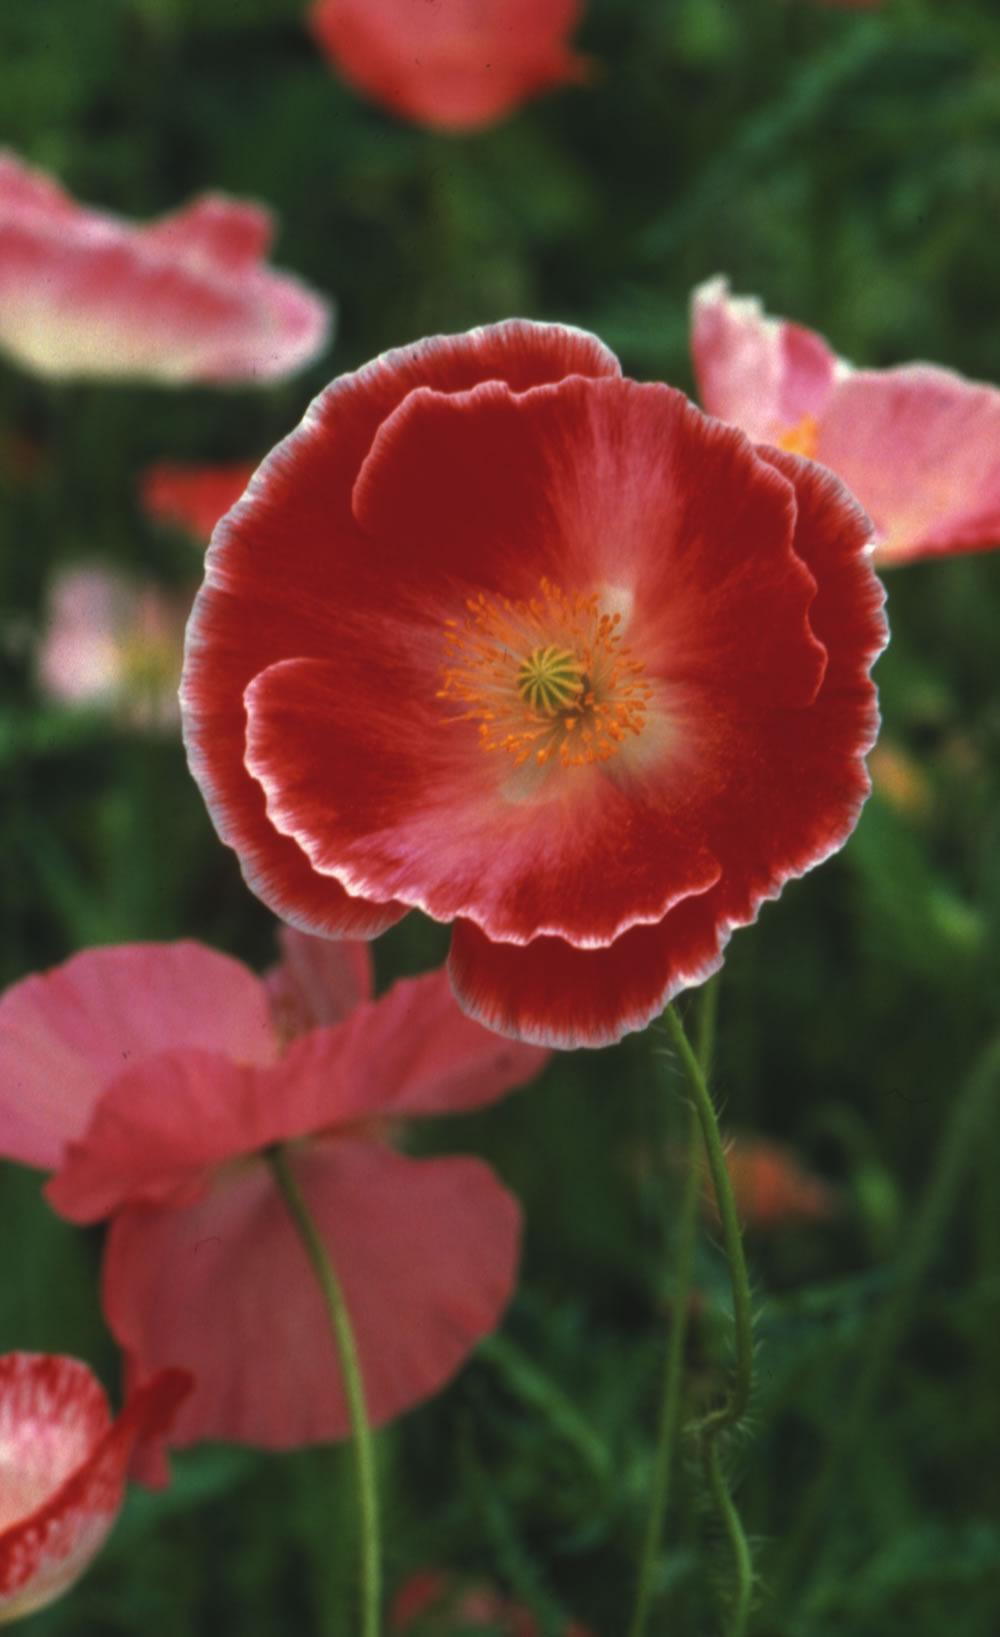 Photo of Poppies (Papaver) uploaded by SongofJoy